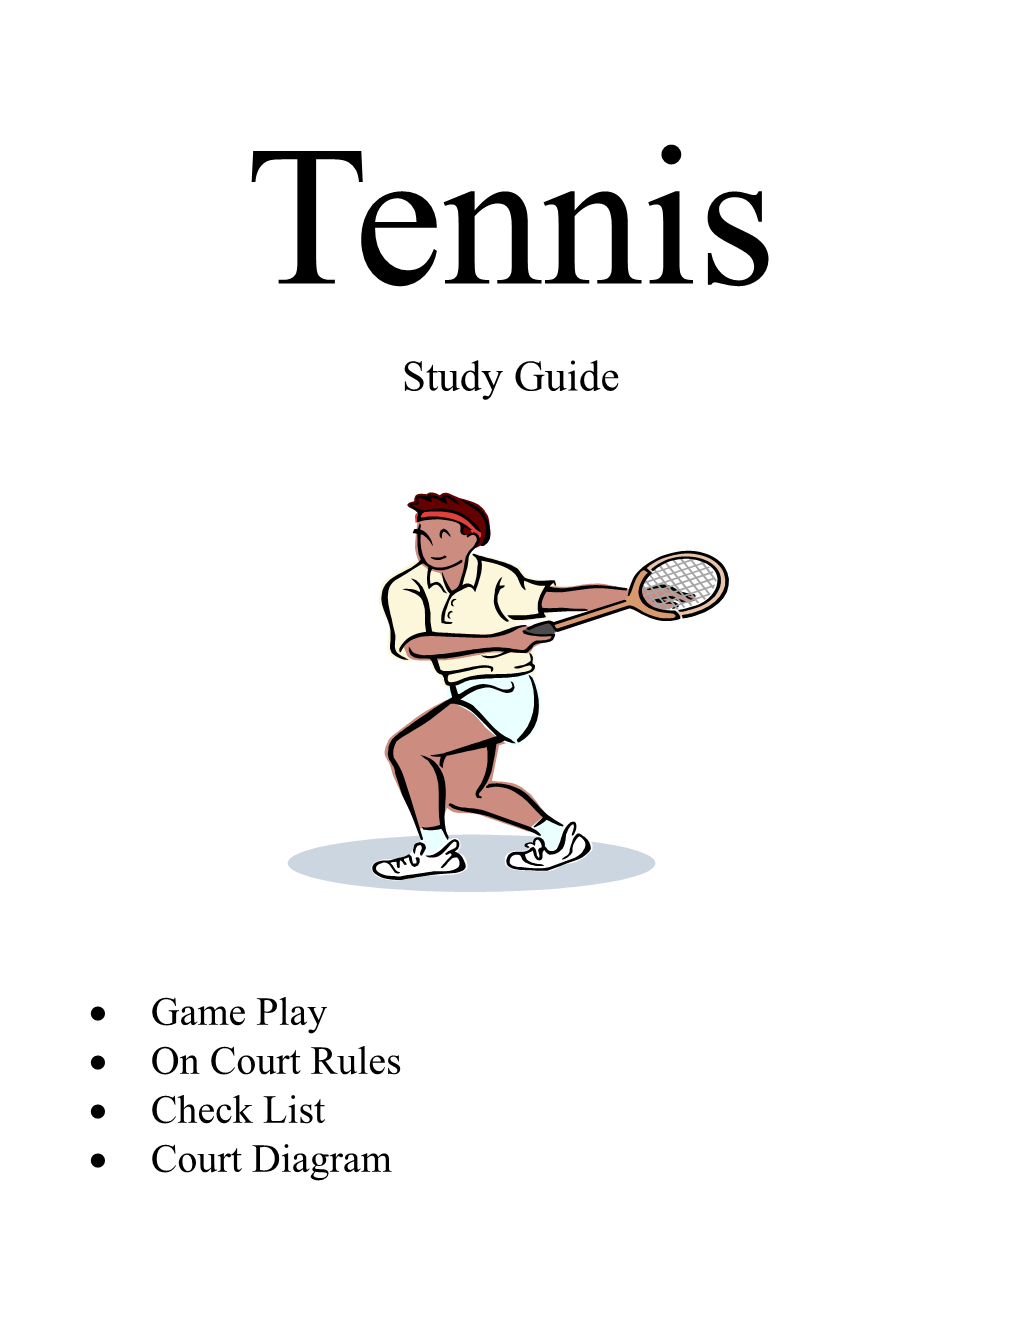 Checklist for Modified Tennis Game